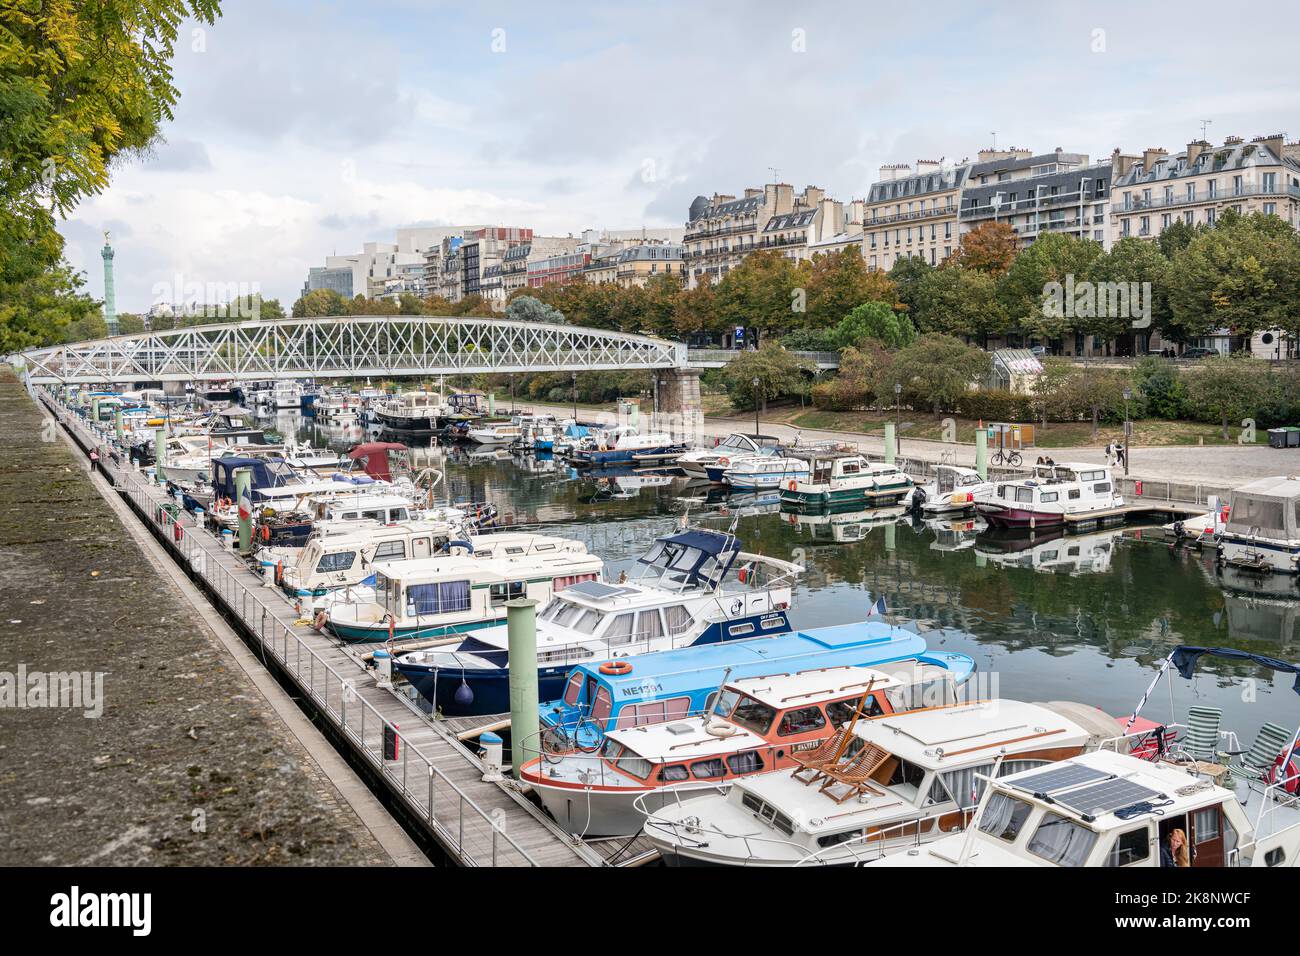 Boats Moored in Bassin de l'Arsenal on the Canal Saint Martin, Paris, France Stock Photo